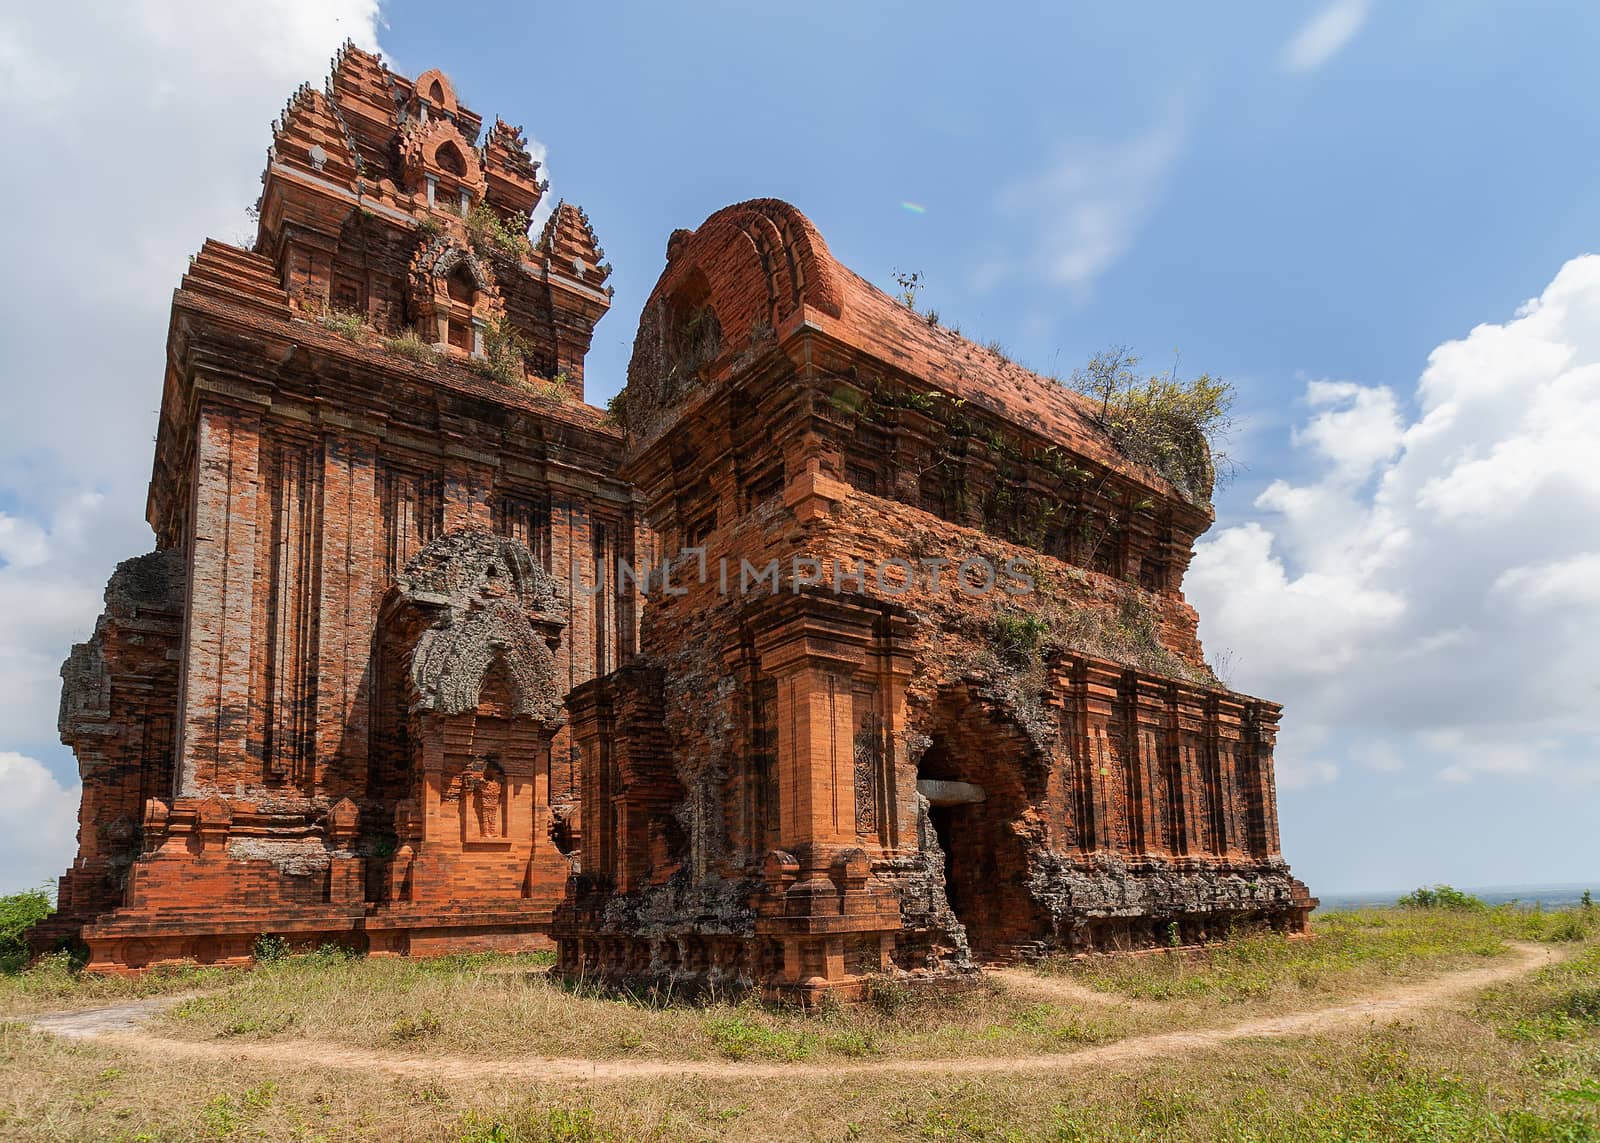 Vietnam, two impressive Banh It Cham towers on the green hill against the blue sky.